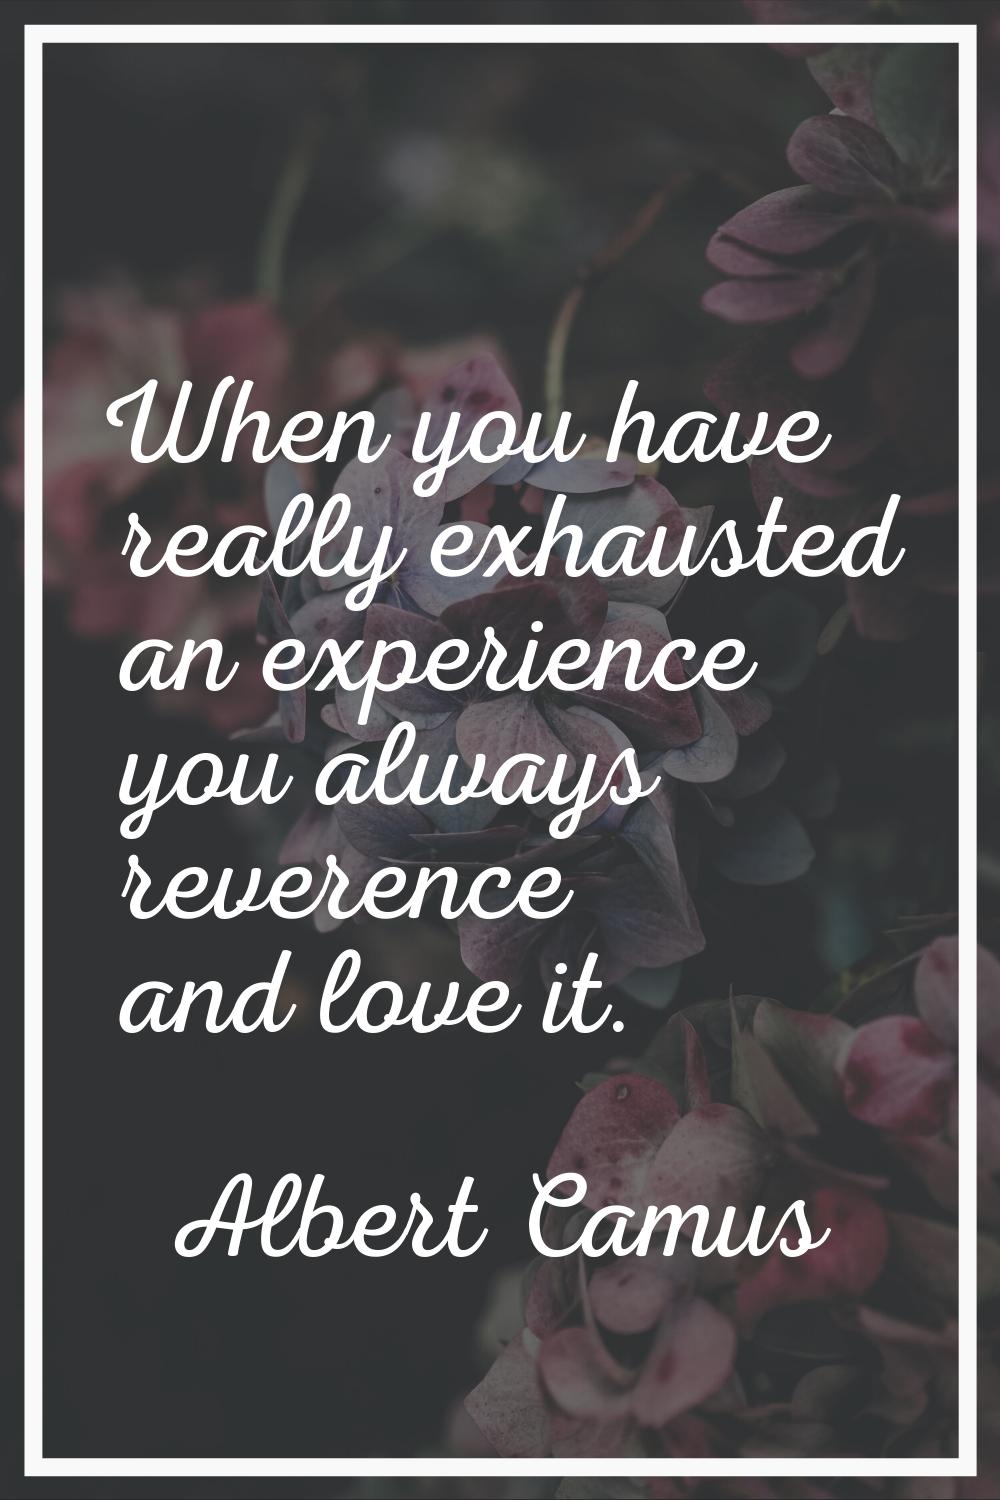 When you have really exhausted an experience you always reverence and love it.